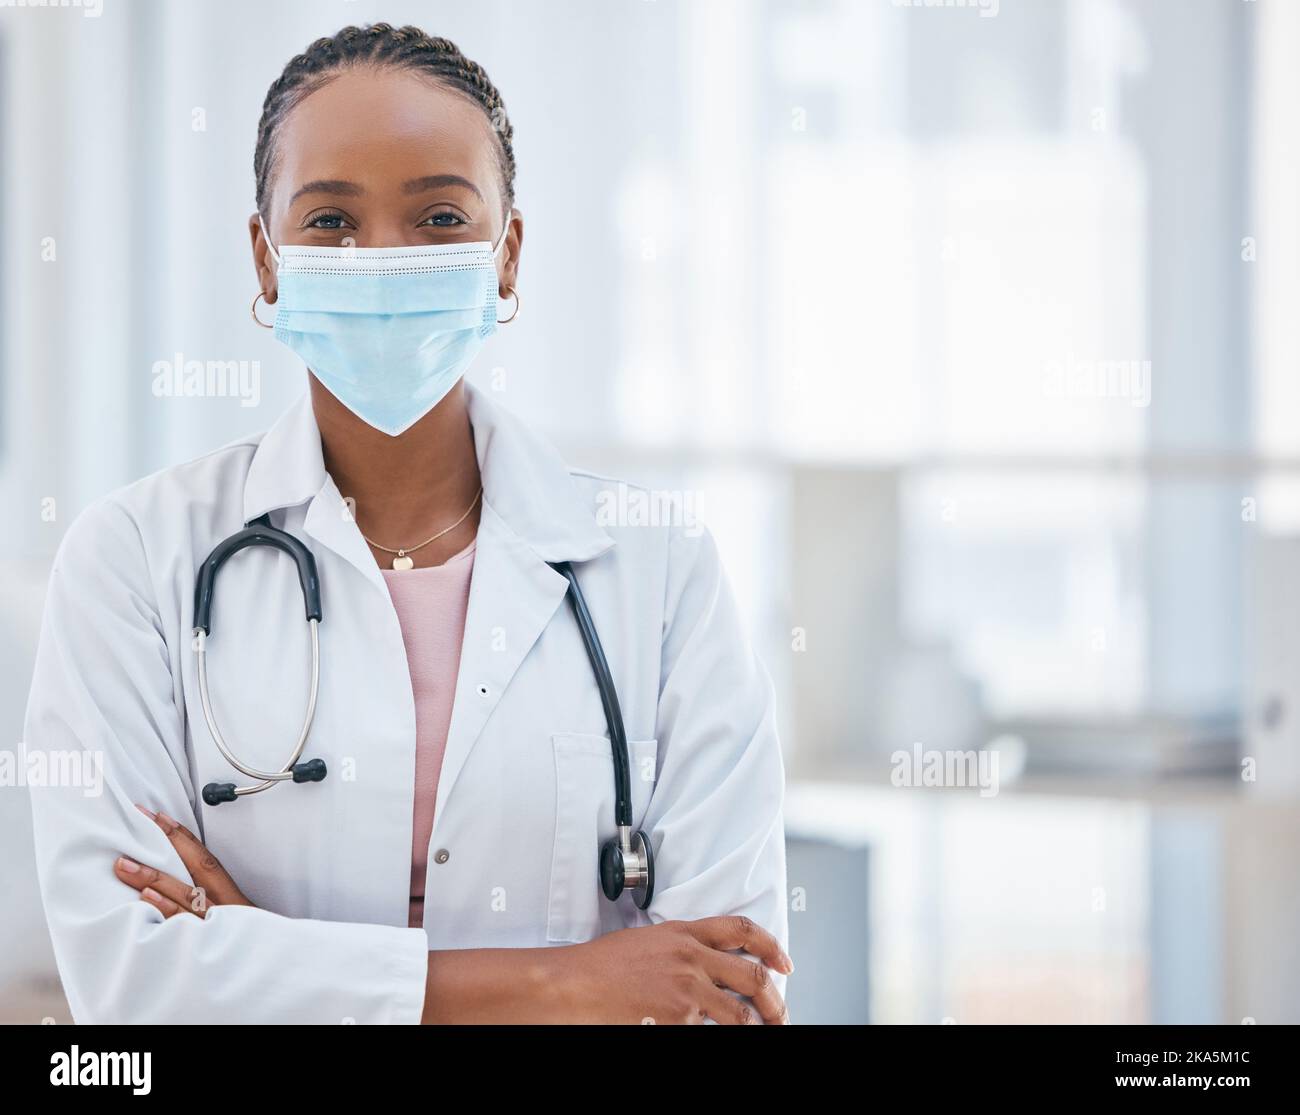 Covid, doctor and confident black woman in healthcare in face mask, leadership mindset and success in medicine. Safety, vision and woman medical Stock Photo